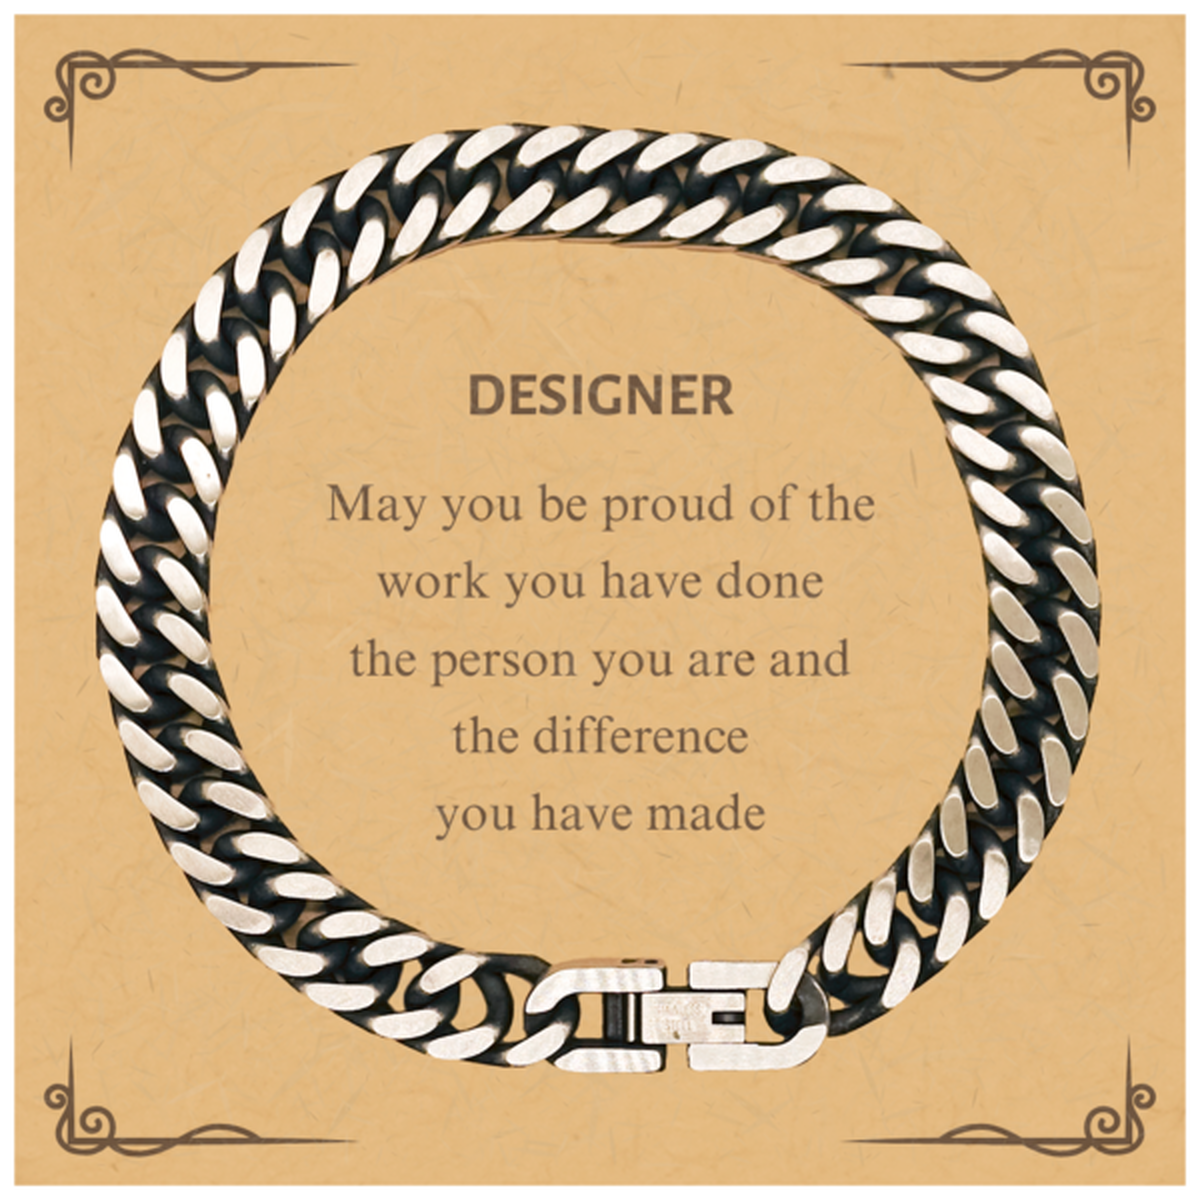 Designer May you be proud of the work you have done, Retirement Designer Cuban Link Chain Bracelet for Colleague Appreciation Gifts Amazing for Designer